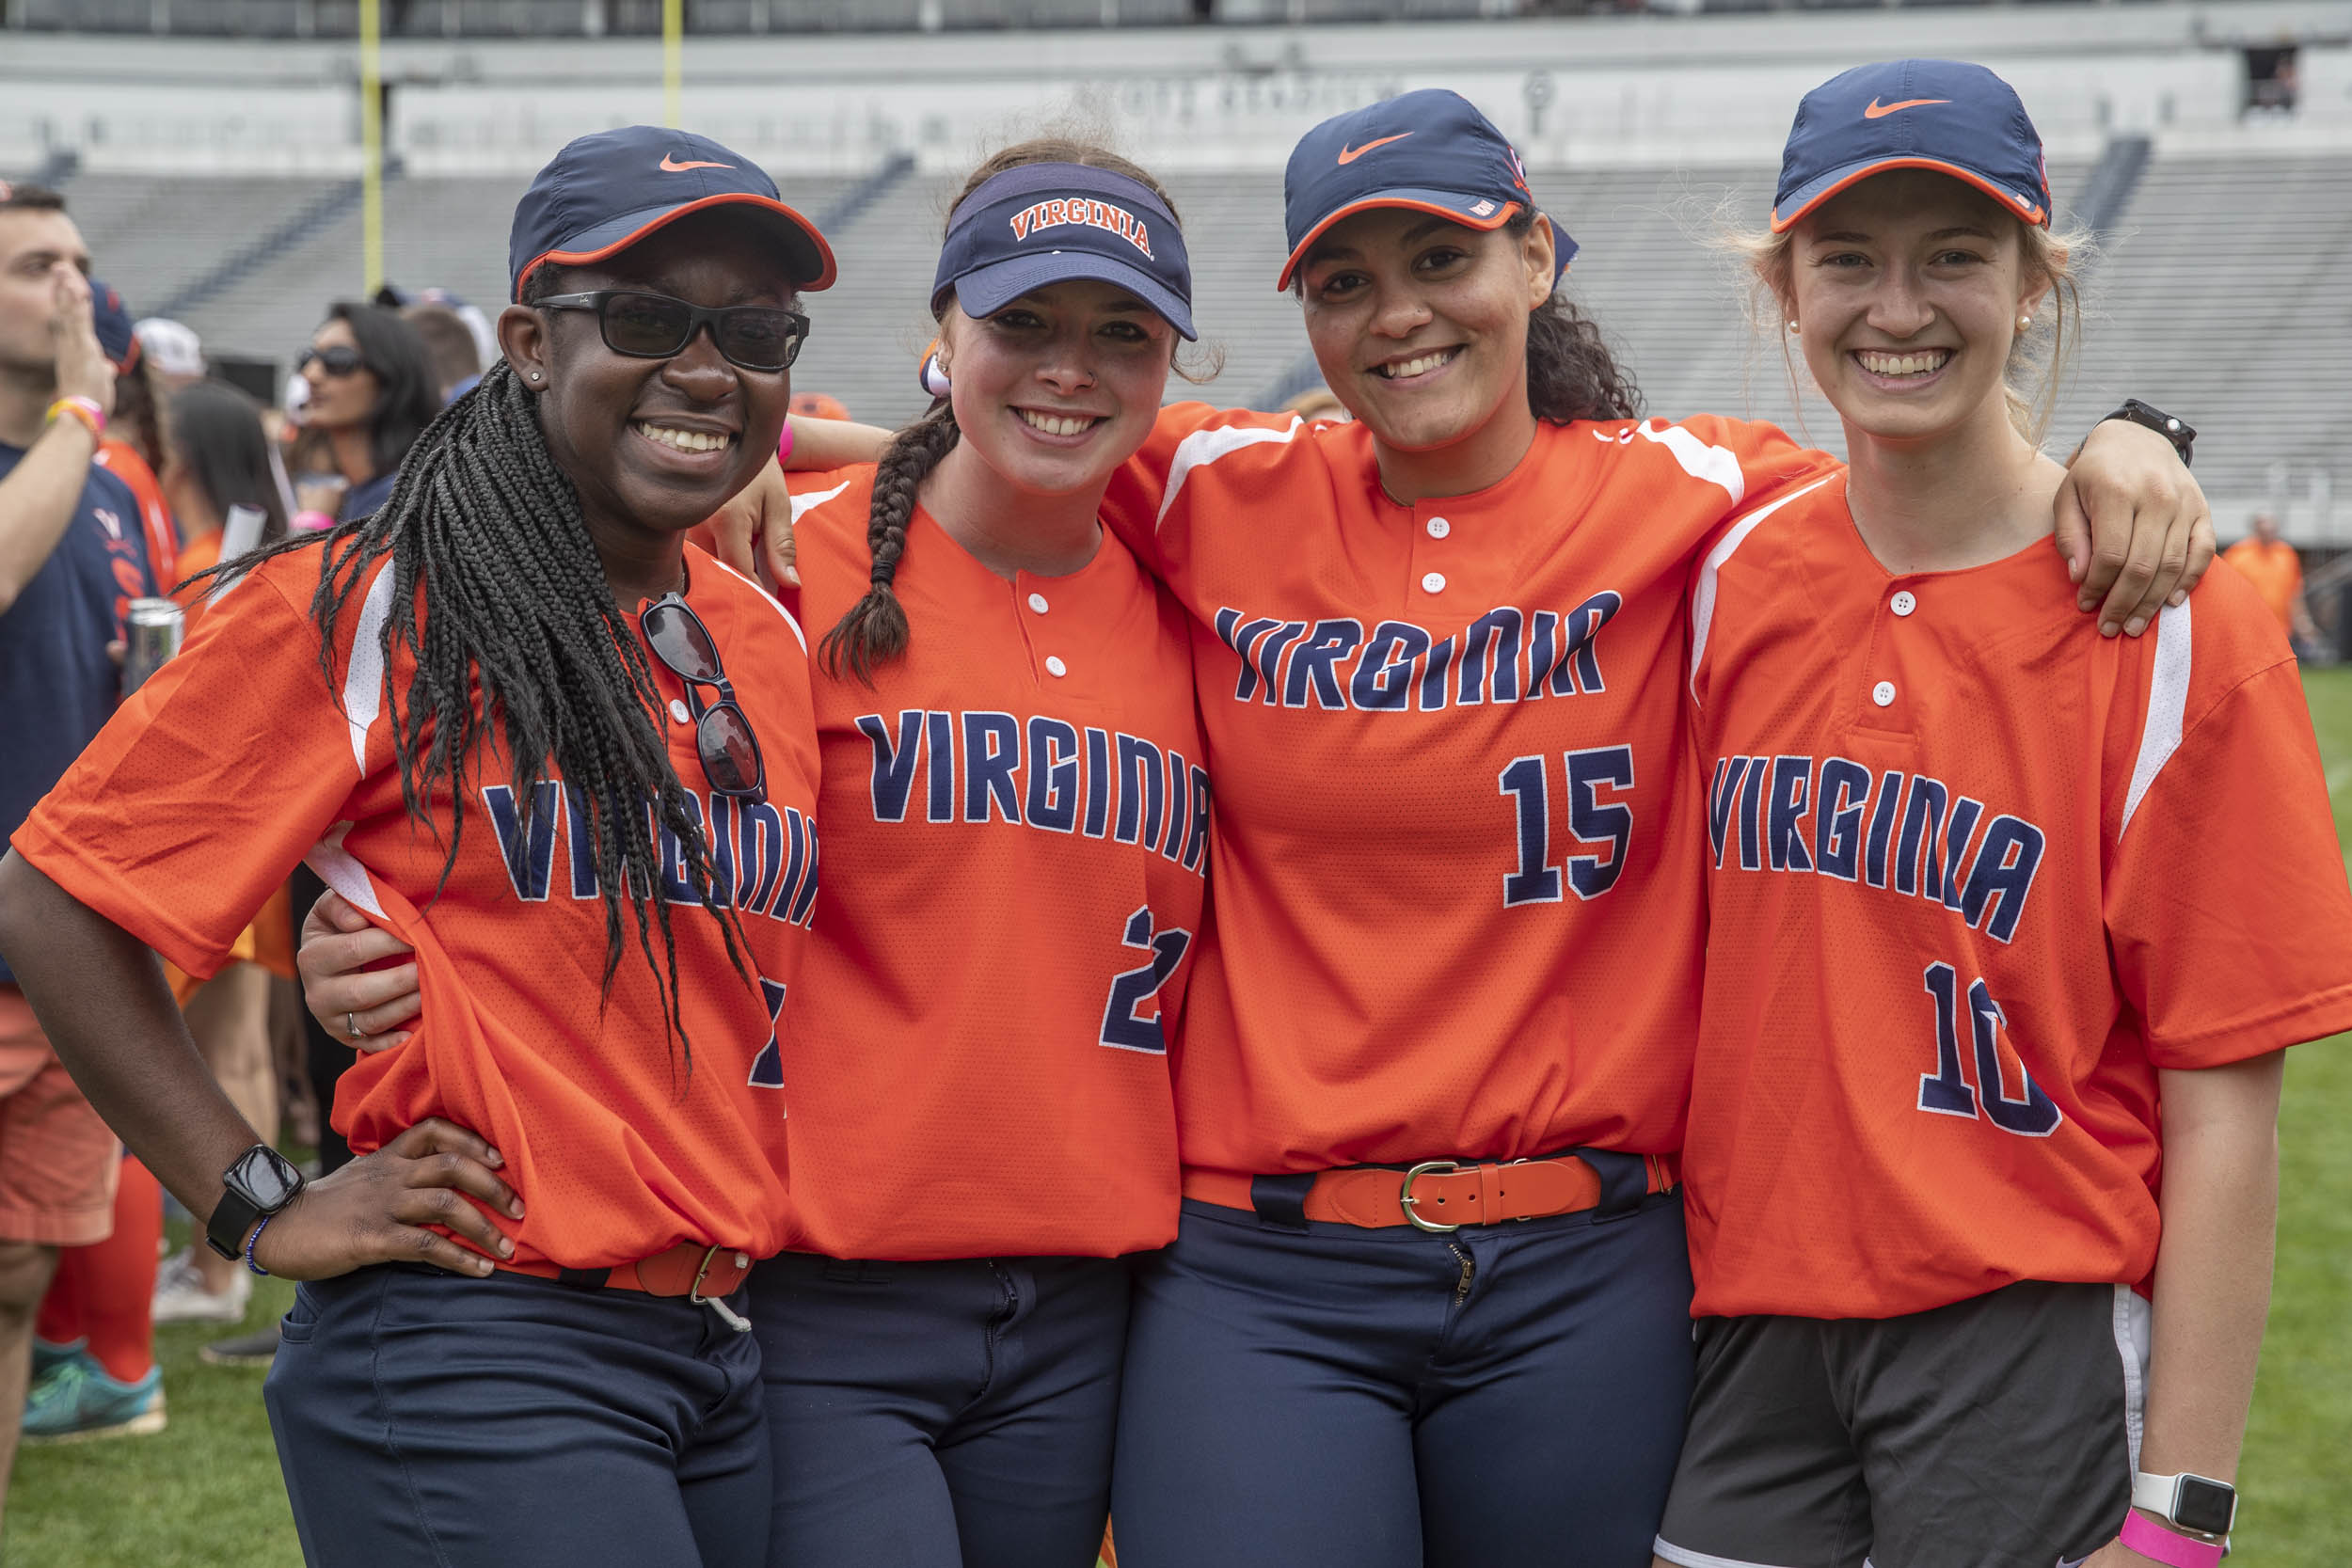 UVA softball players stand together for a picture